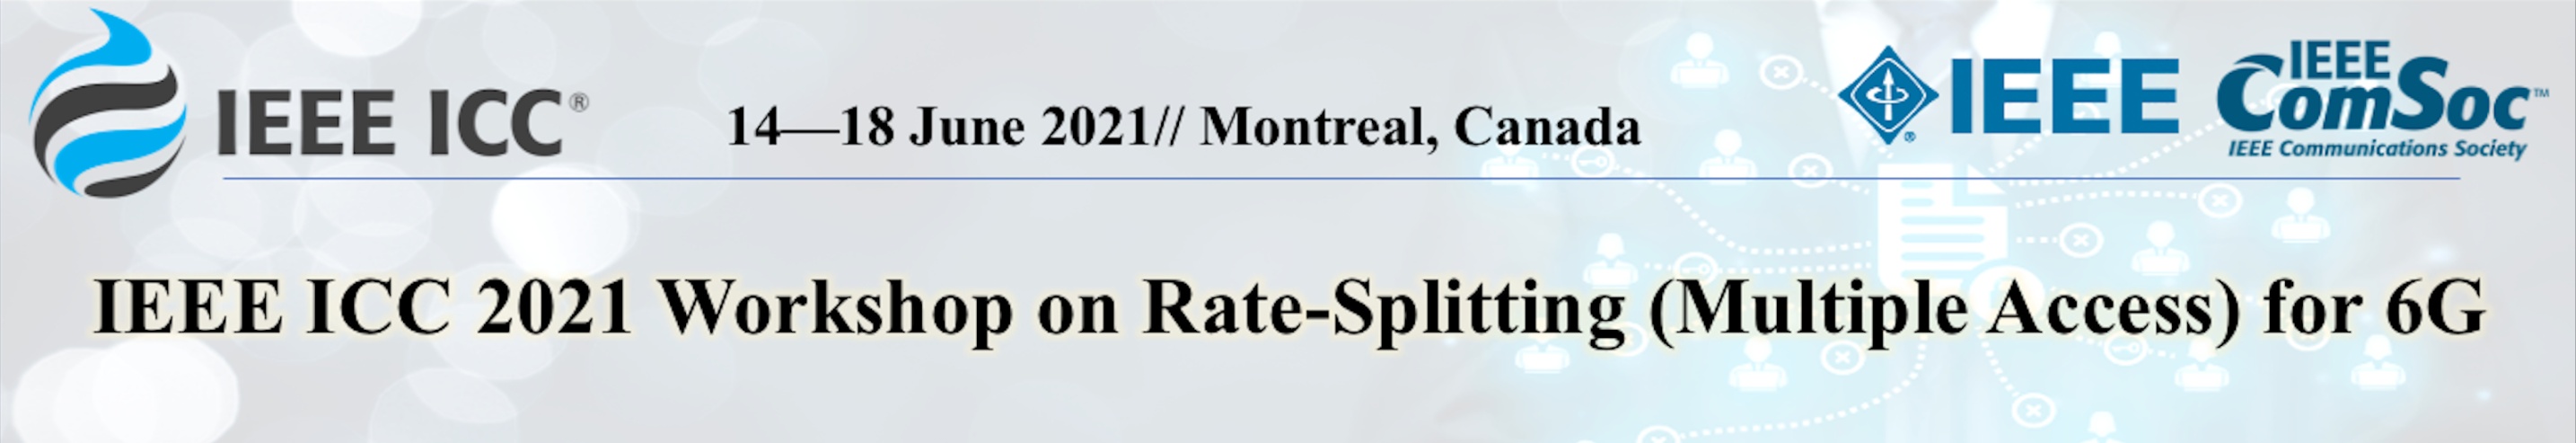 IEEE ICC 2021 Workshop on Rate-Splitting (Multiple Access) for 6G